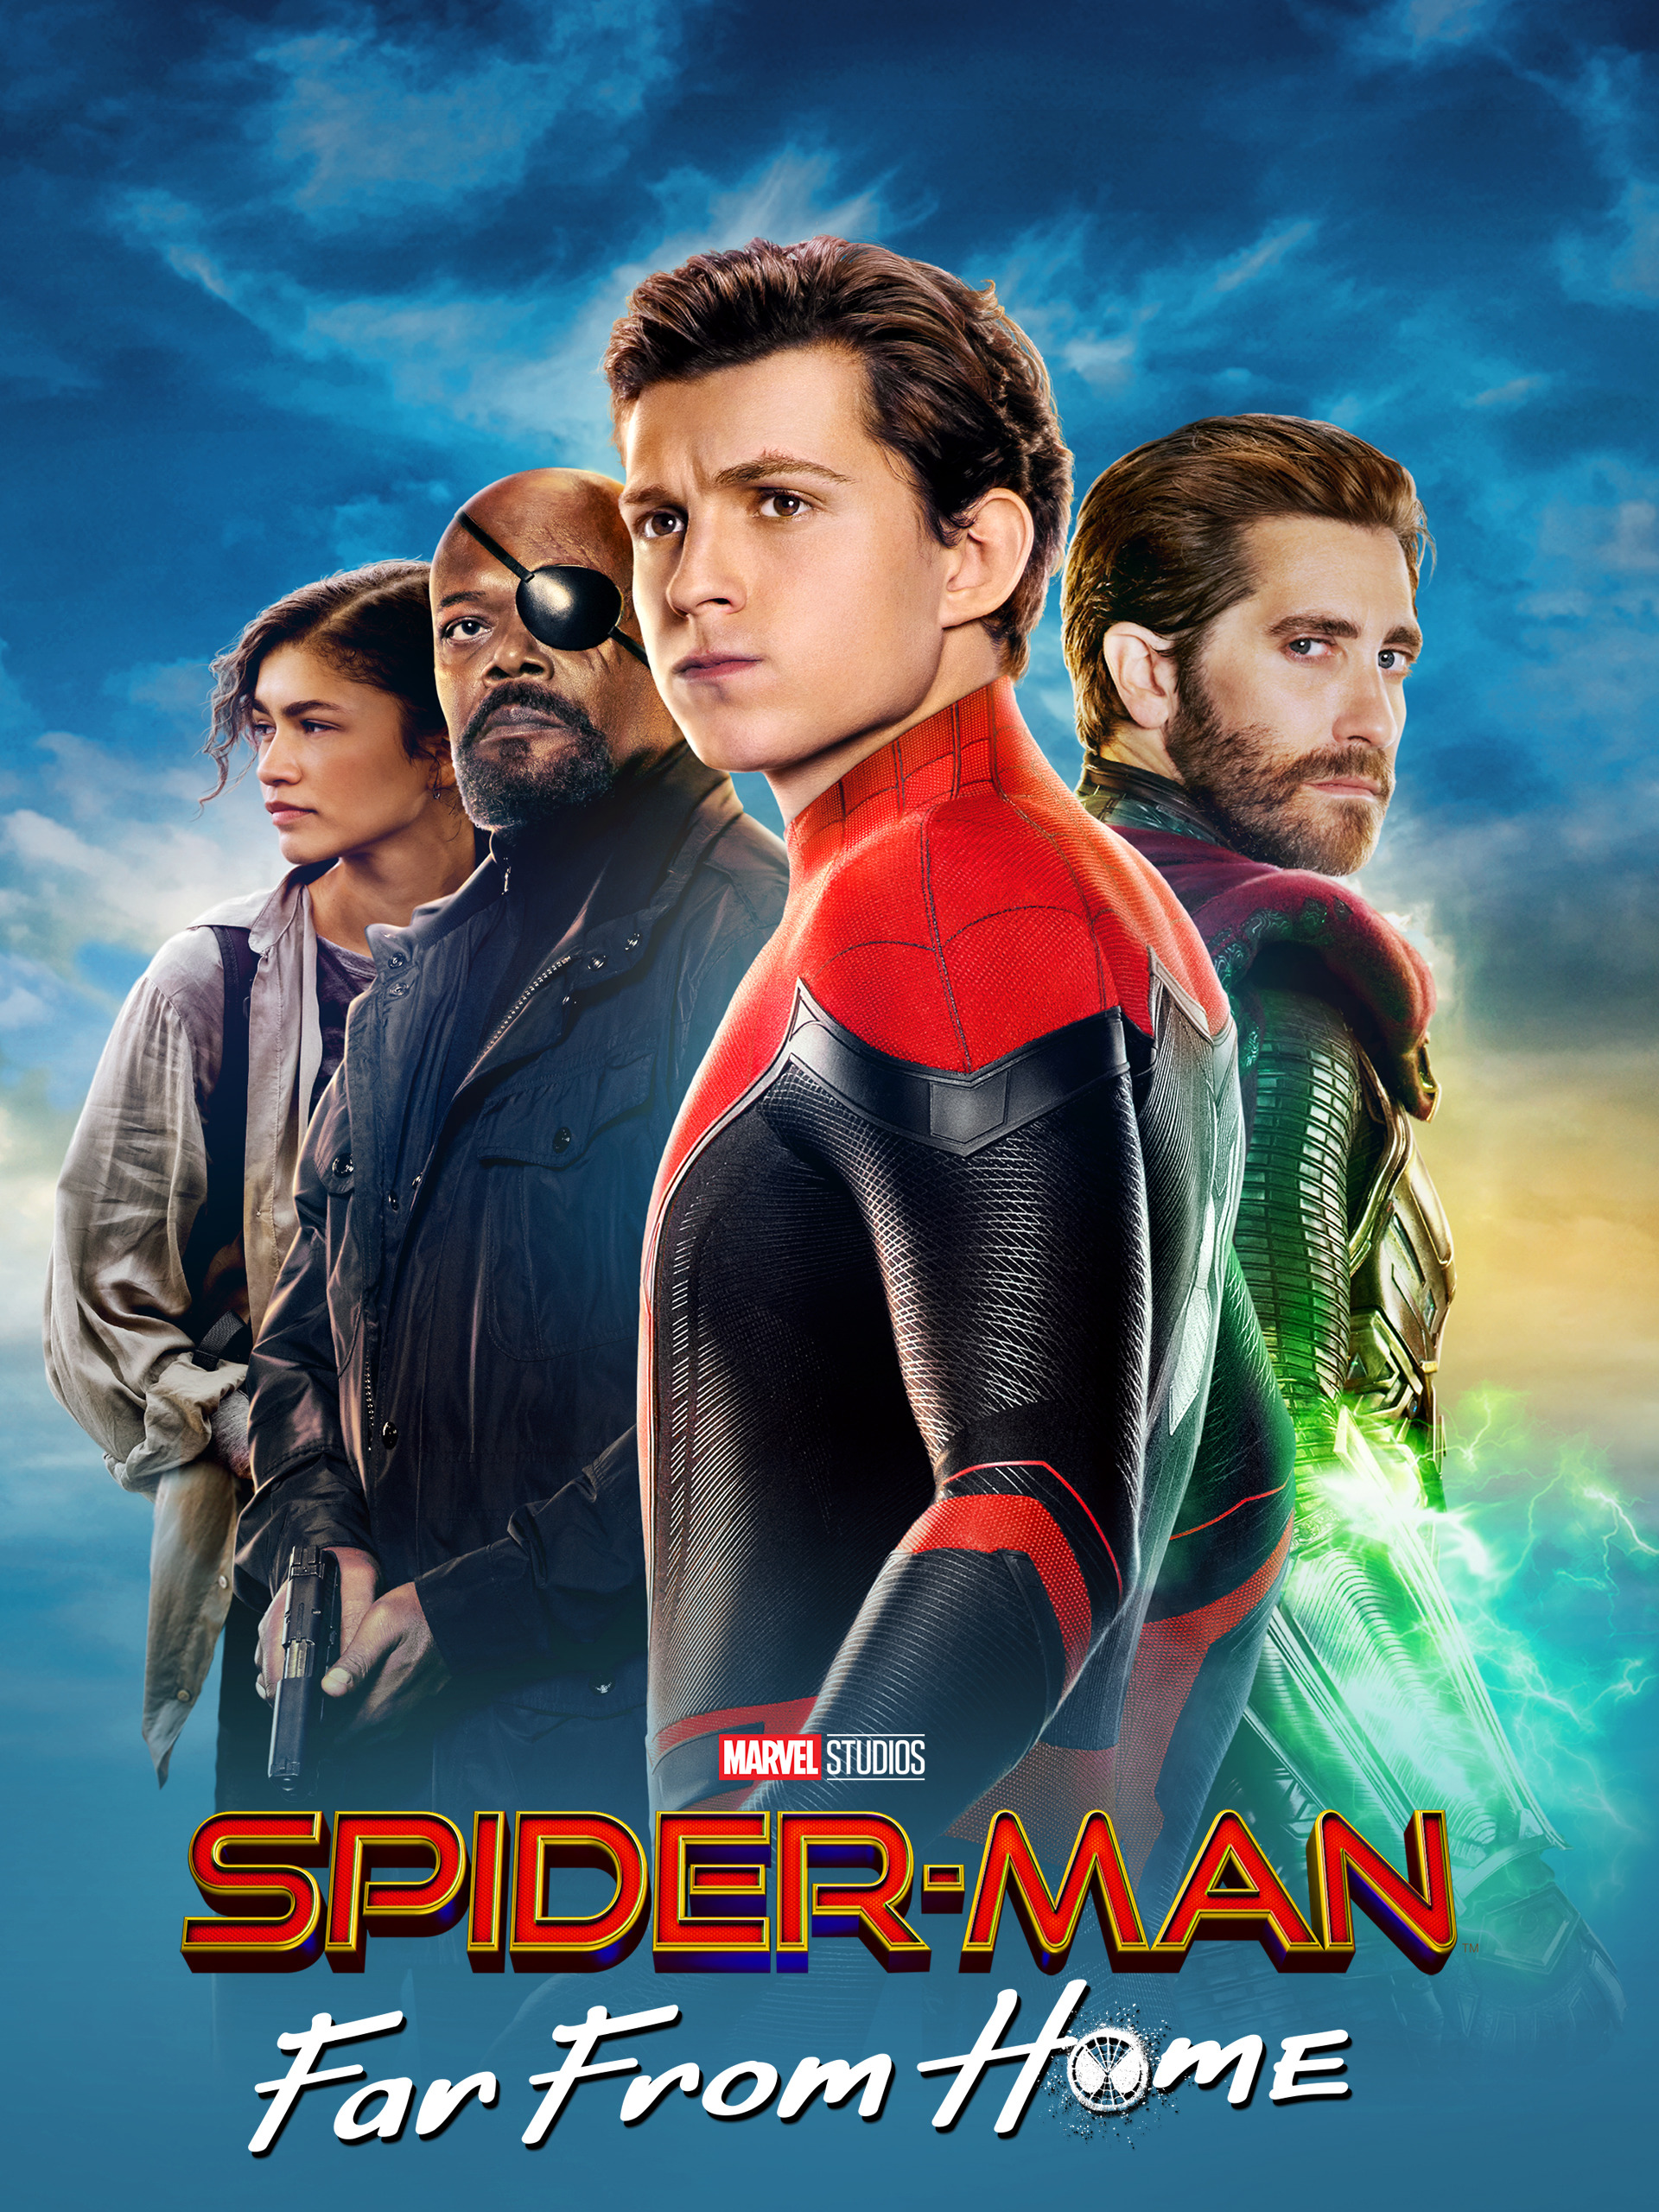 Great back to school movies - Cover of Spider-man: Far From Home